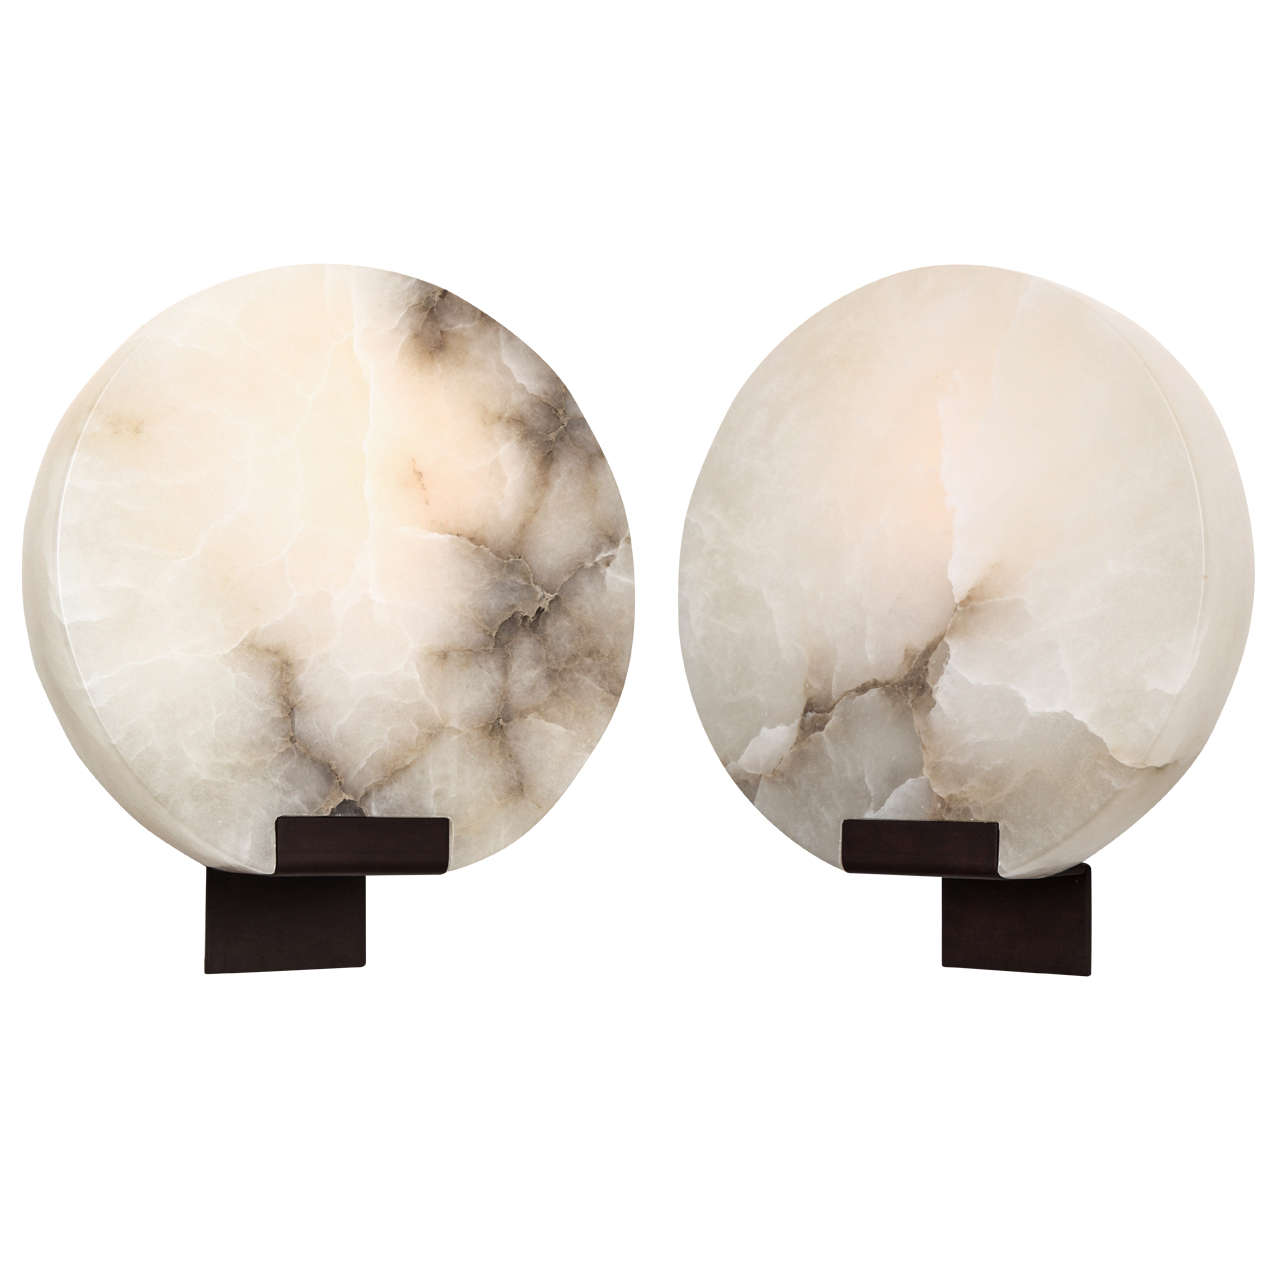 Pair of Veined Alabaster "Moon" Sconces by Stephen Downes